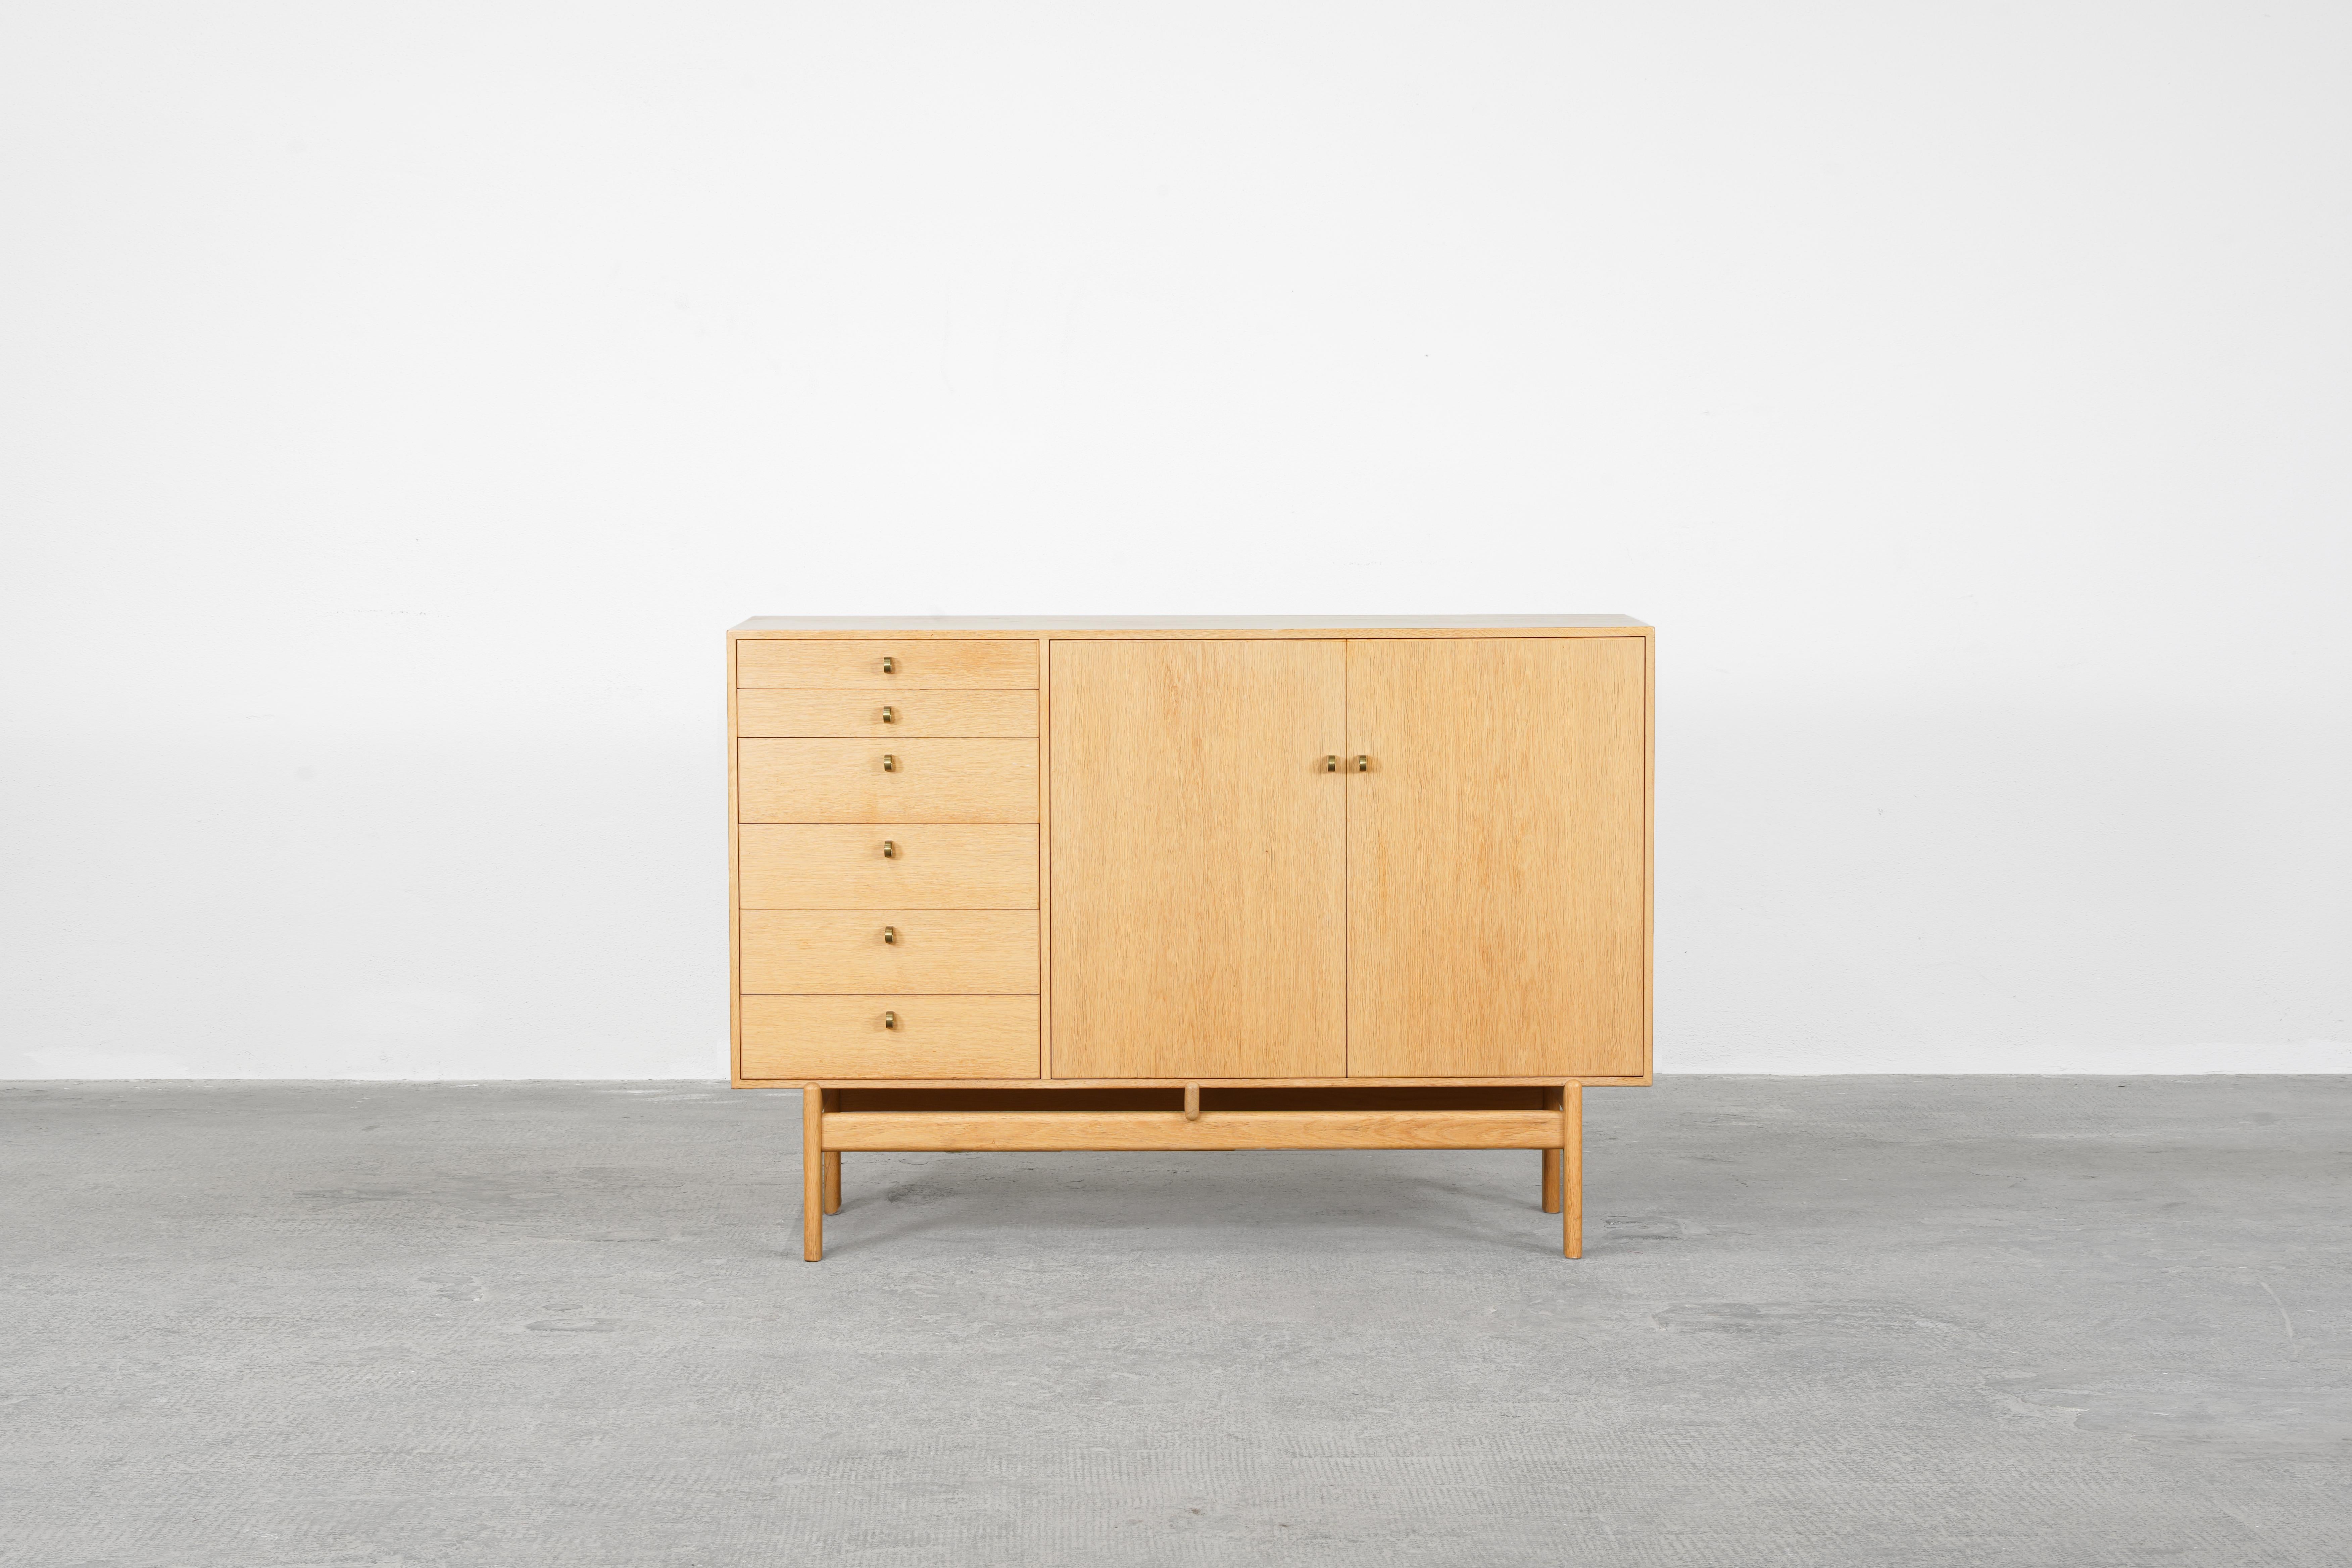 Beautiful cabinet with drawers designed by Tove and Edvard Kindt-Larsen and produced by Seffle Möbelfabrik, Denmark in 1961.
The cabinet is in excellent original condition without any repairs or damages. It is made out of oak and brass elements and